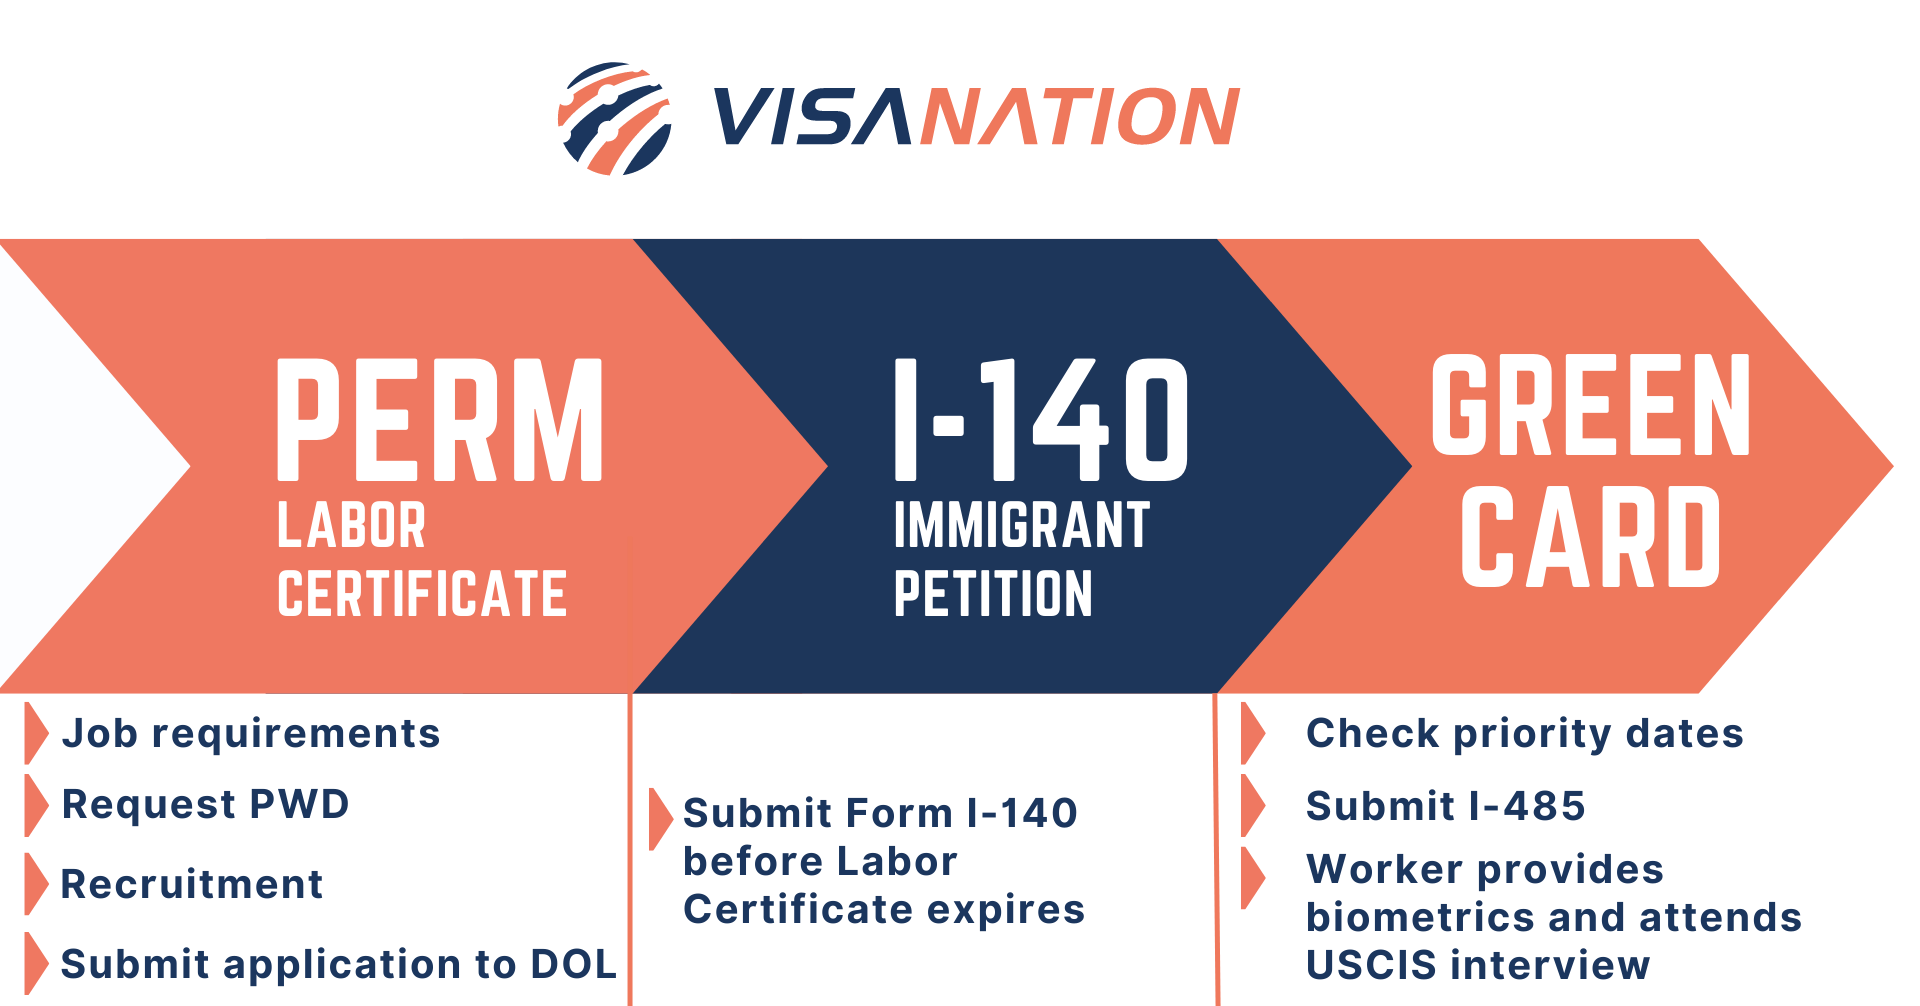 PERM Labor Certification: How To Get In 2022 | U.S. Visa Lawyers